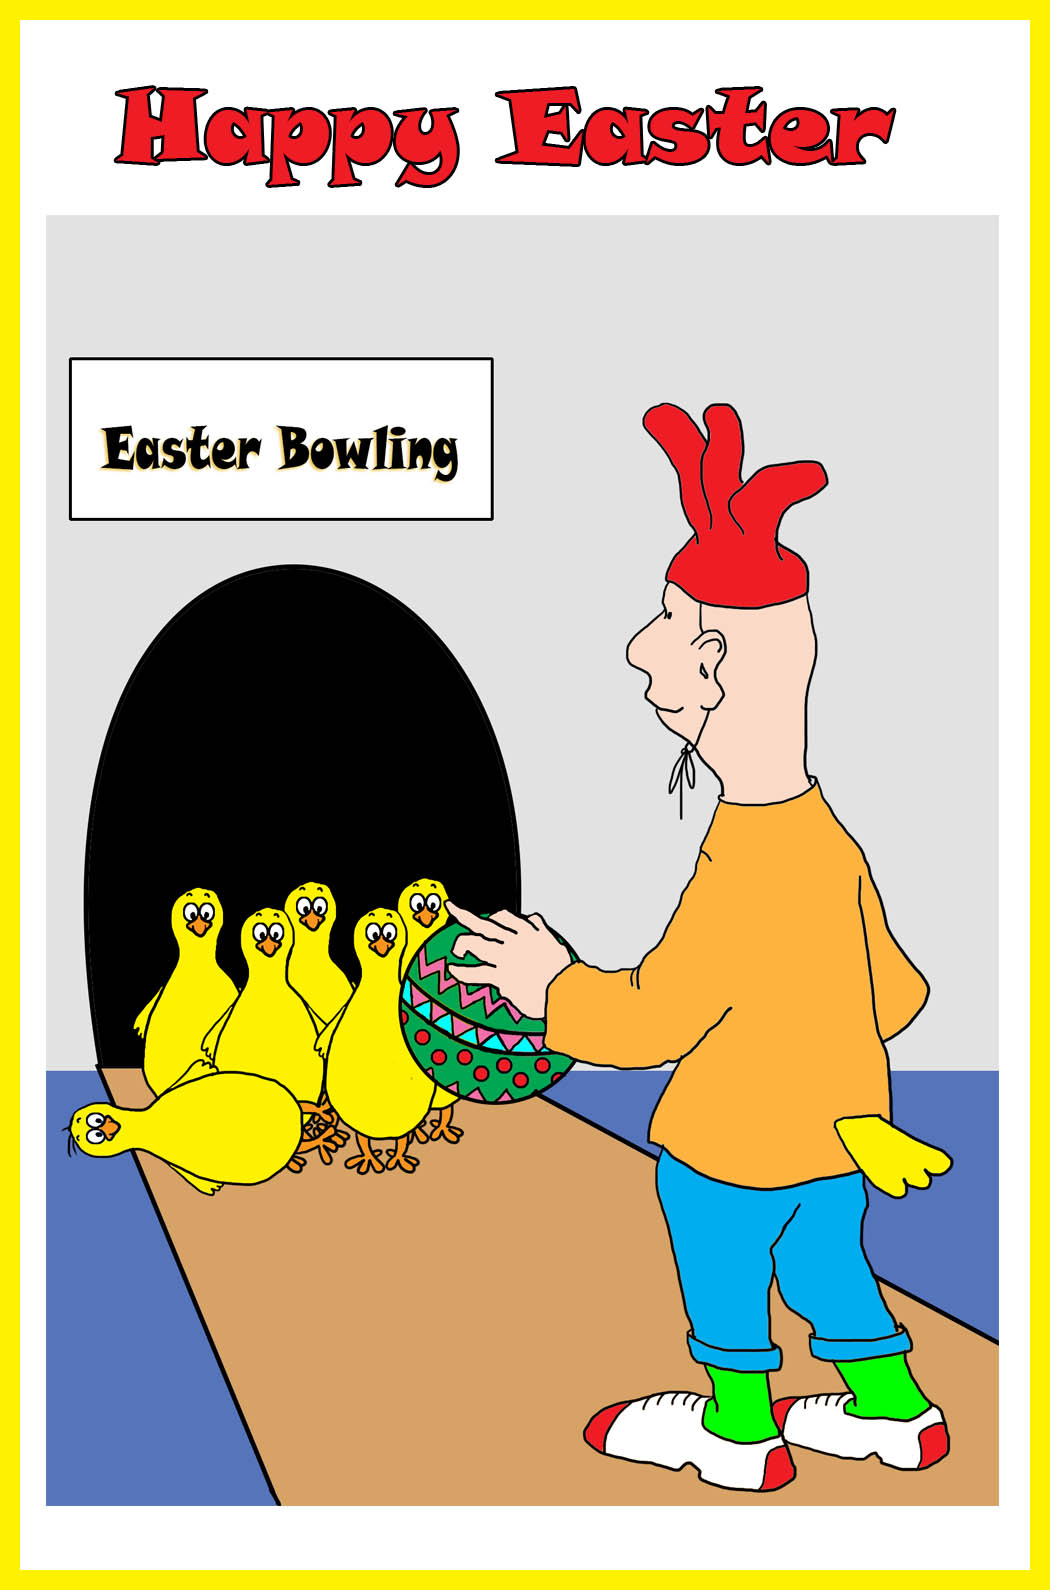 funny bowling clipart free - photo #45